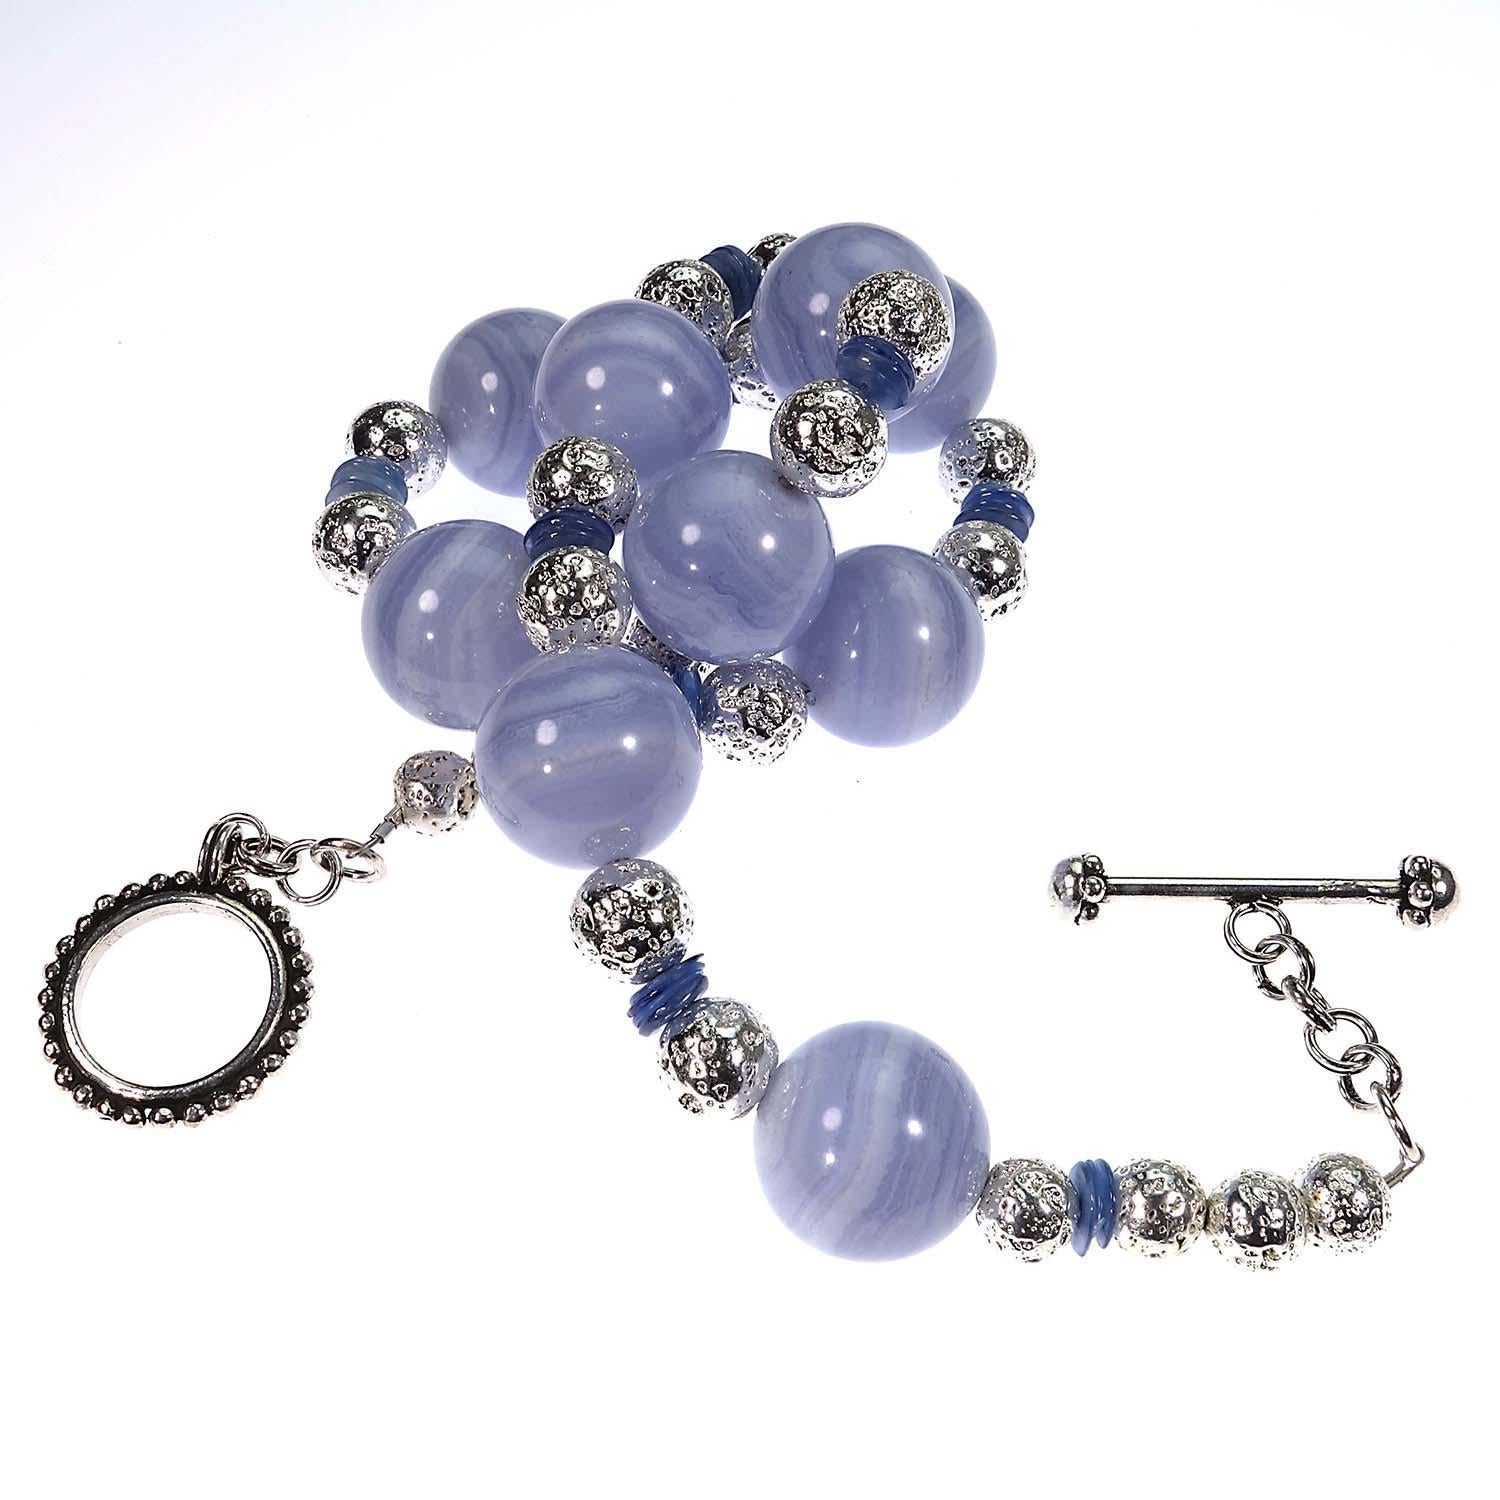 Stunning Blue Lace Agate Necklace 3